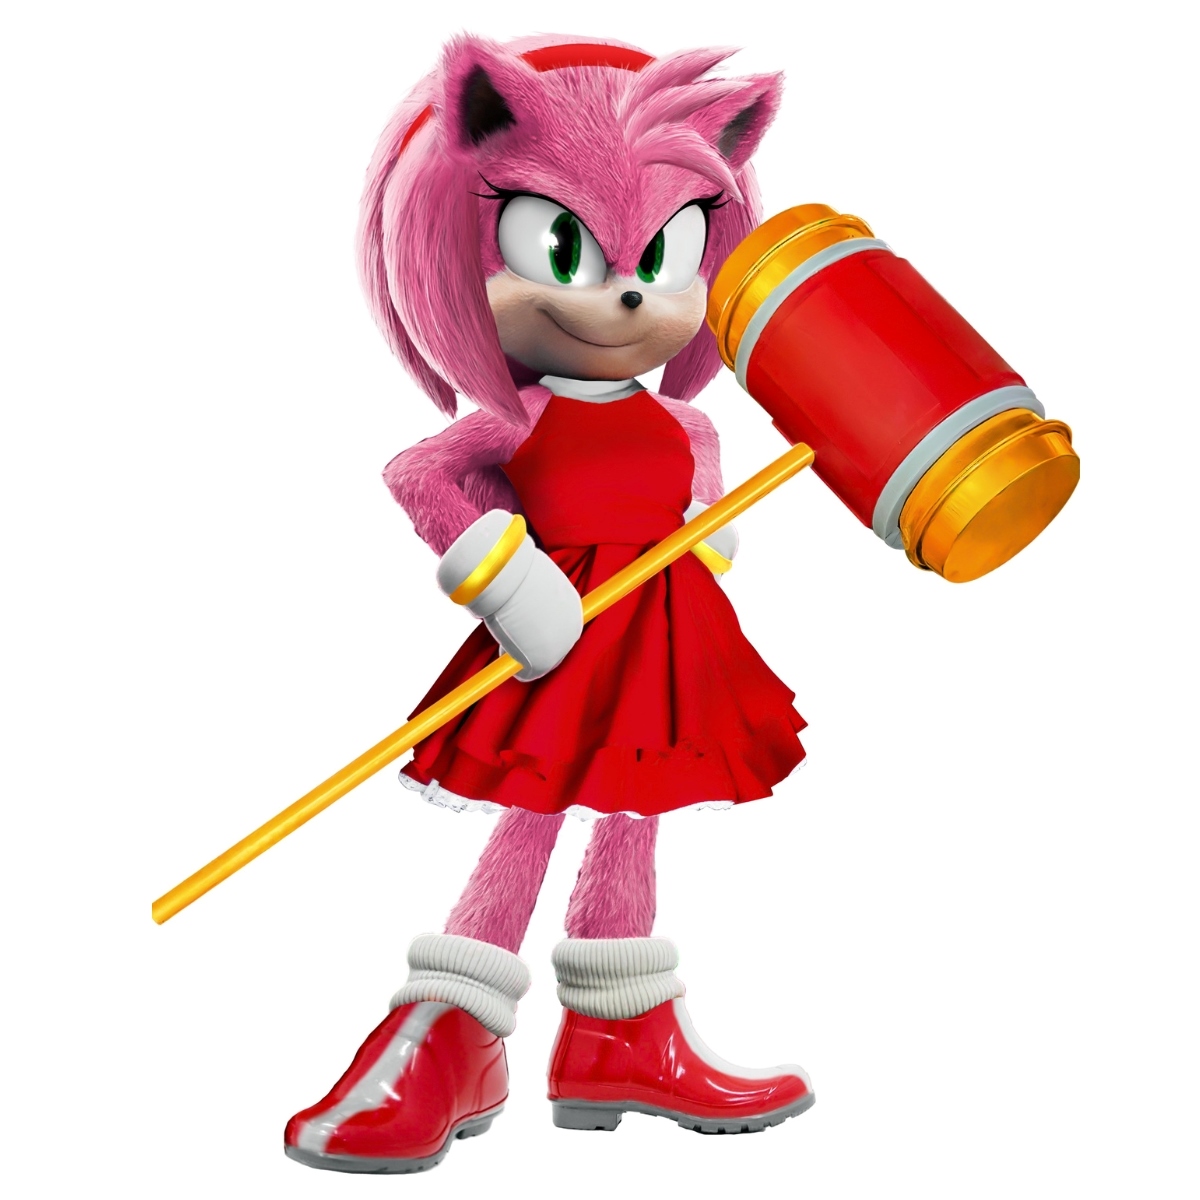 ciprian andrei add show me pictures of amy rose photo